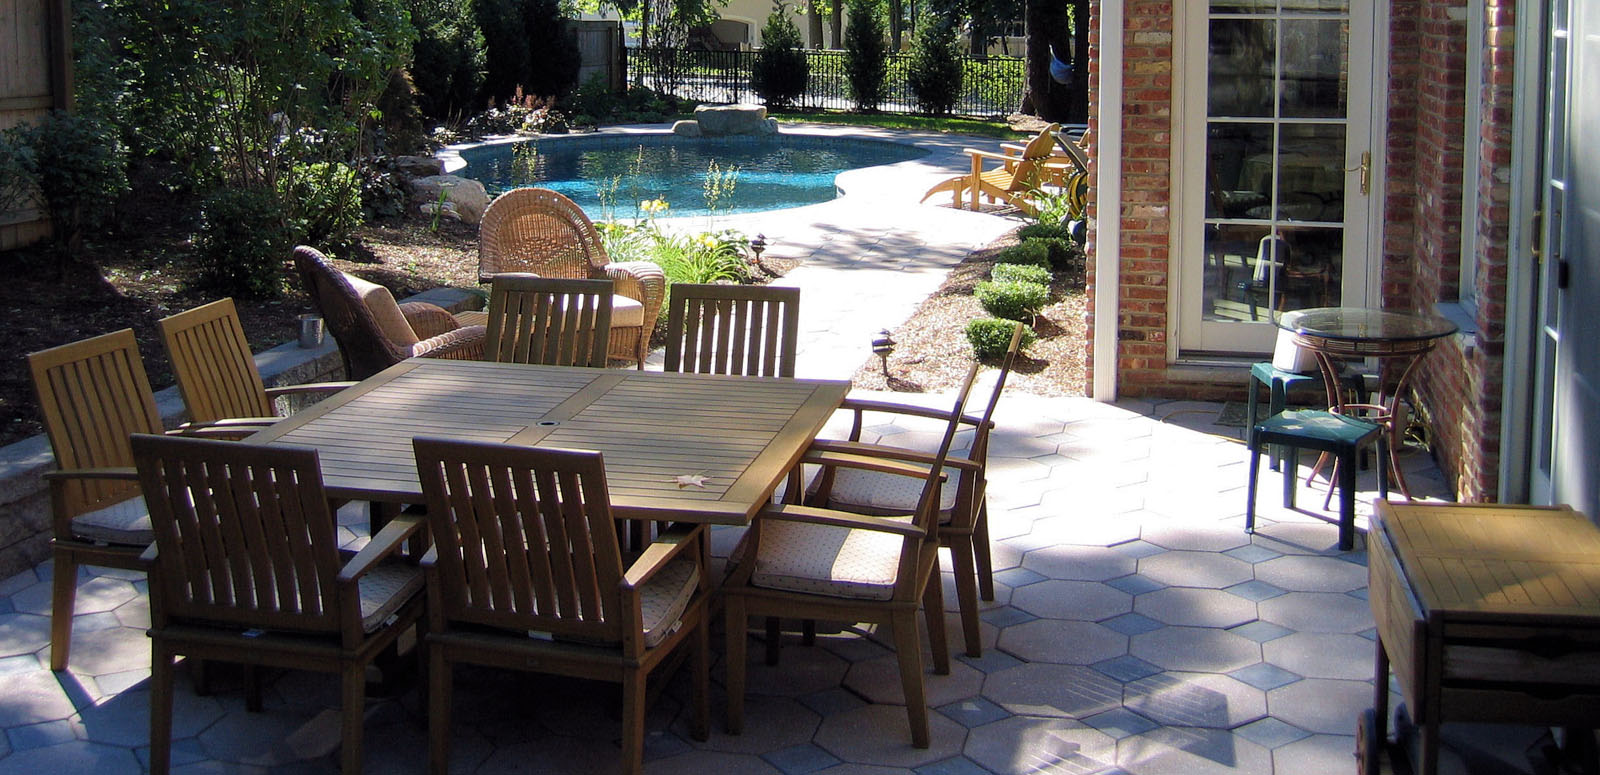 Paver Patio with Pool in Background - NJ